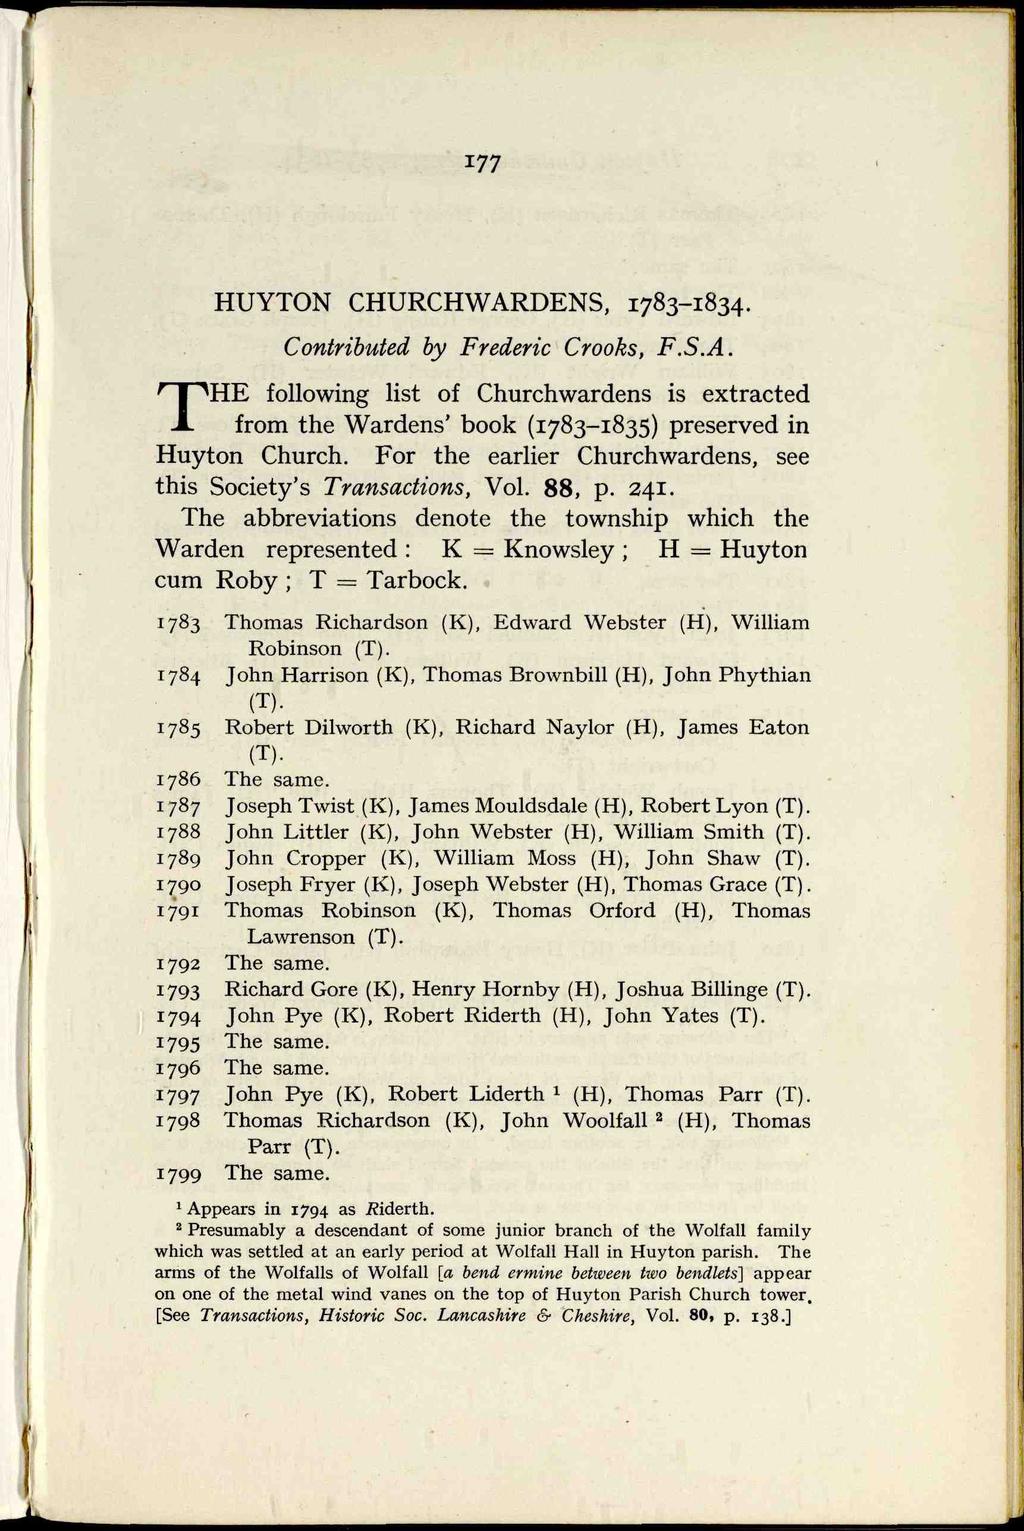 HUYTON CHURCHWARDENS, 1783-1834. Contributed by Frederic Crooks, F.S.A. THE following list of Churchwardens is extracted from the Wardens' book (1783-1835) preserved in Huyton Church.